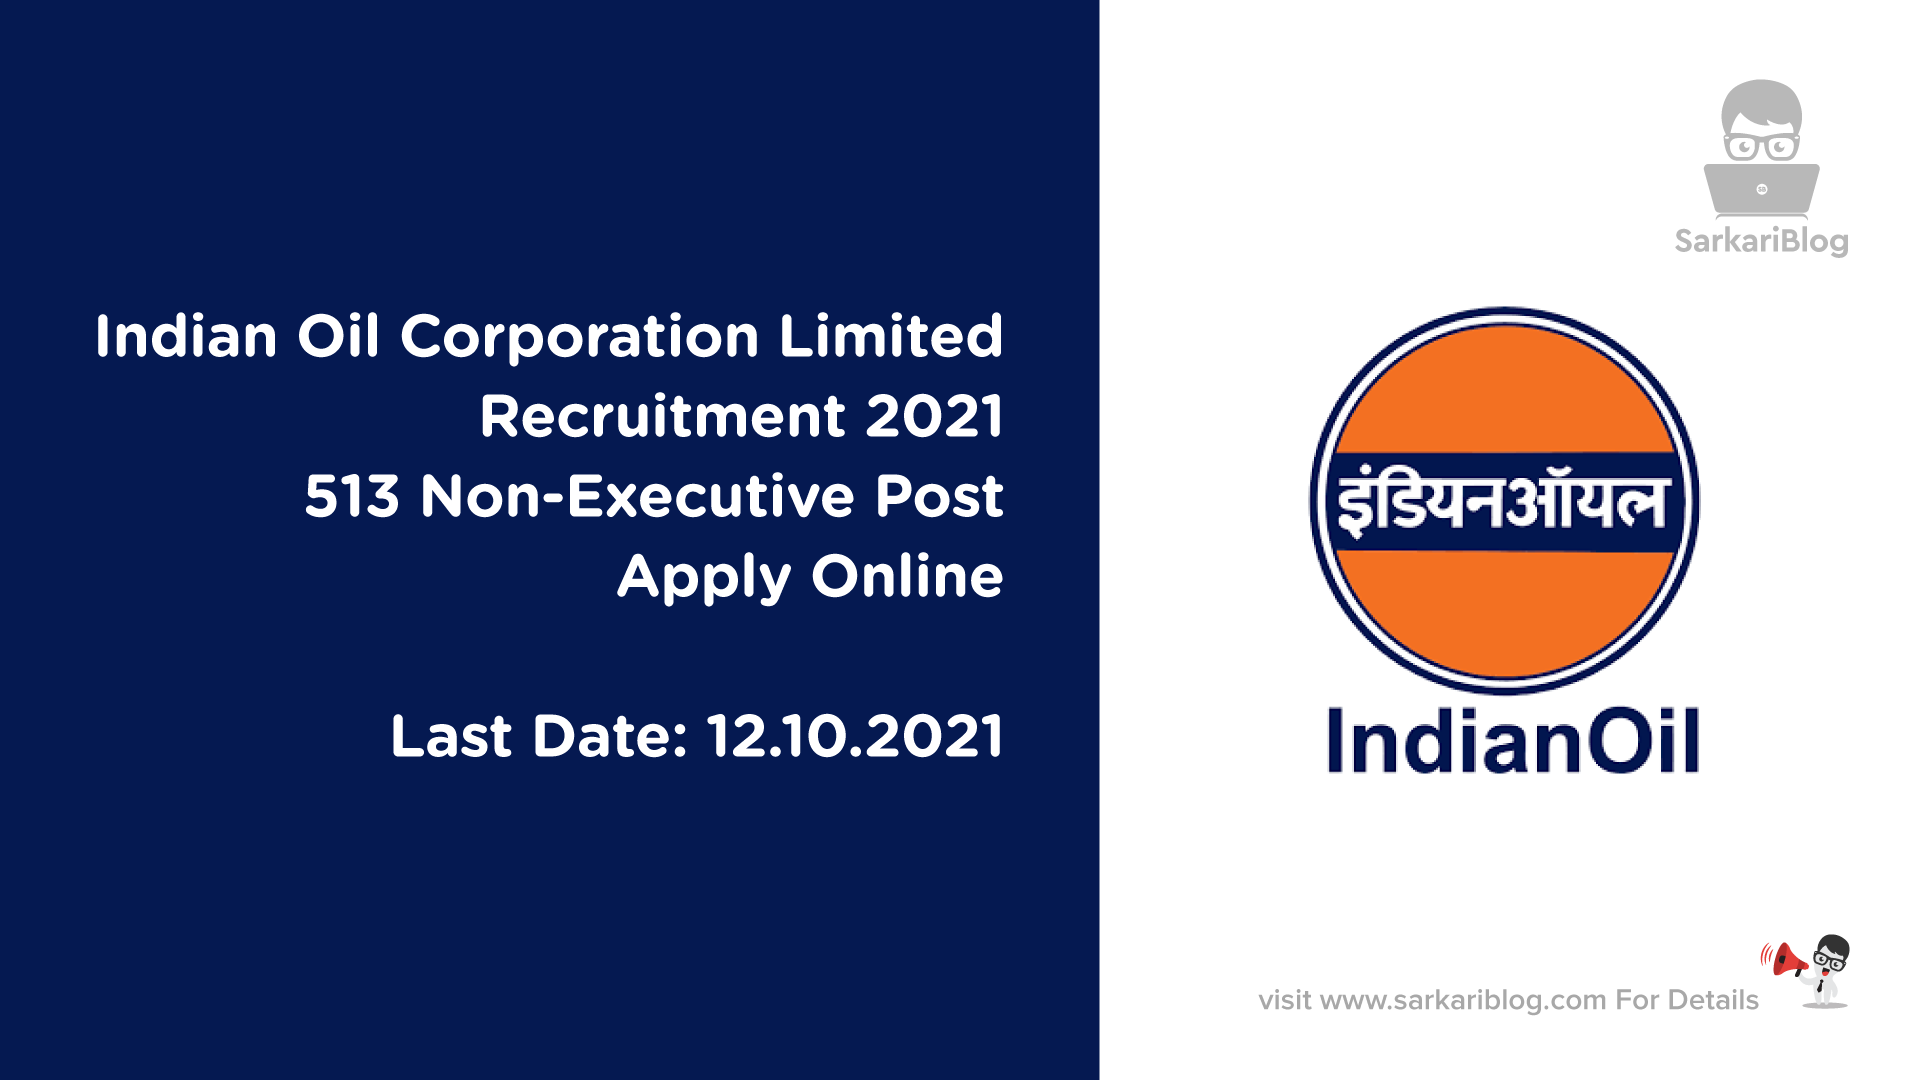 Indian Oil Corporation Limited Recruitment 2021, 513 Non-Executive Post, Apply Online